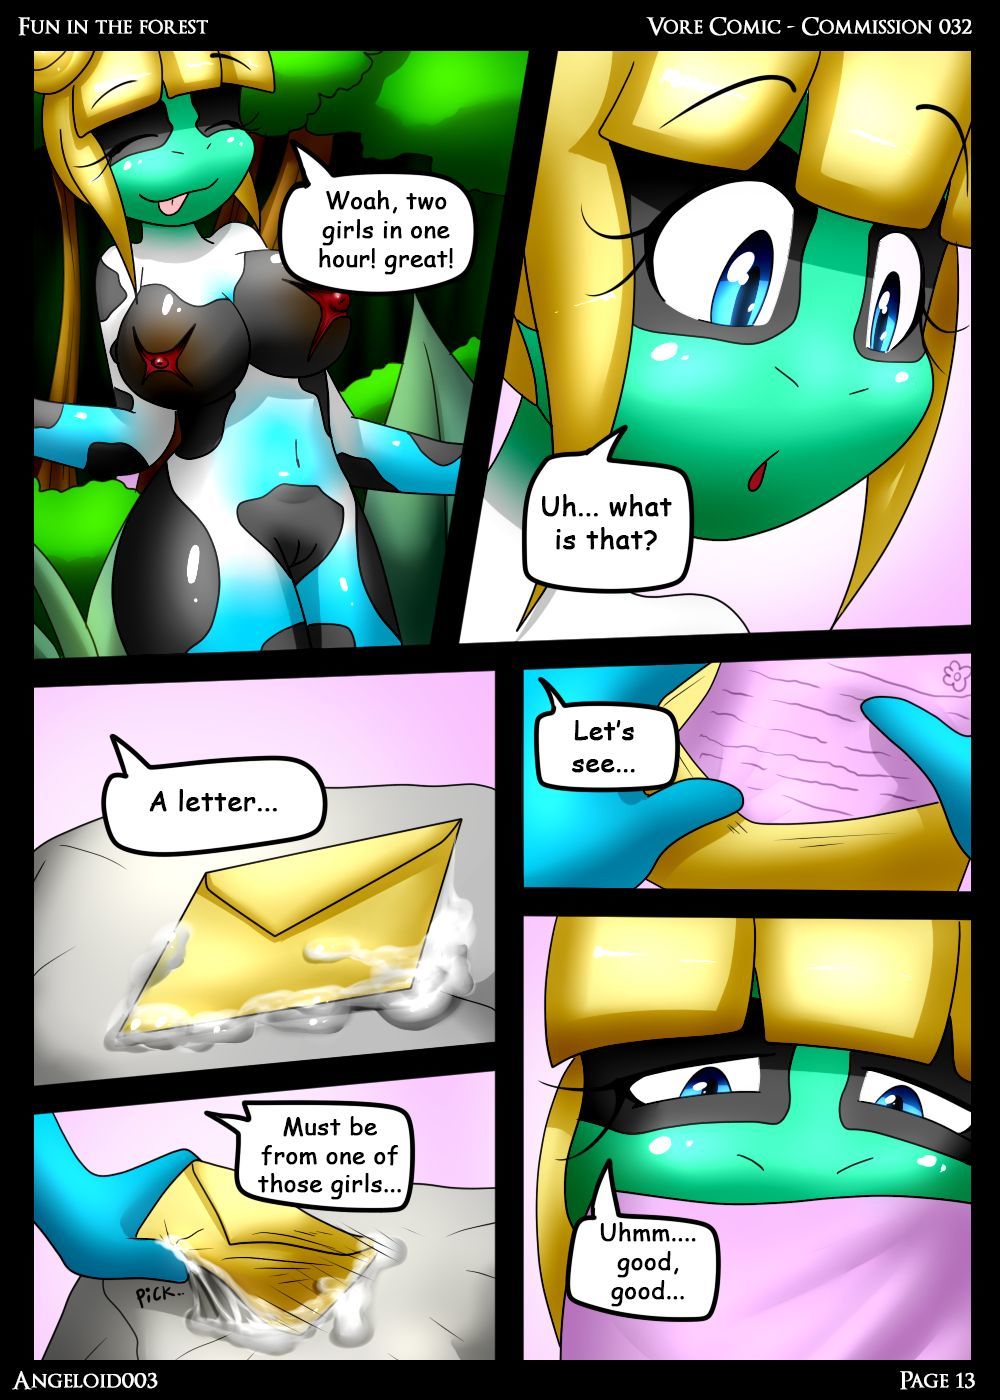 Fun in the Forest - Comm032 Angeloid003 page 13